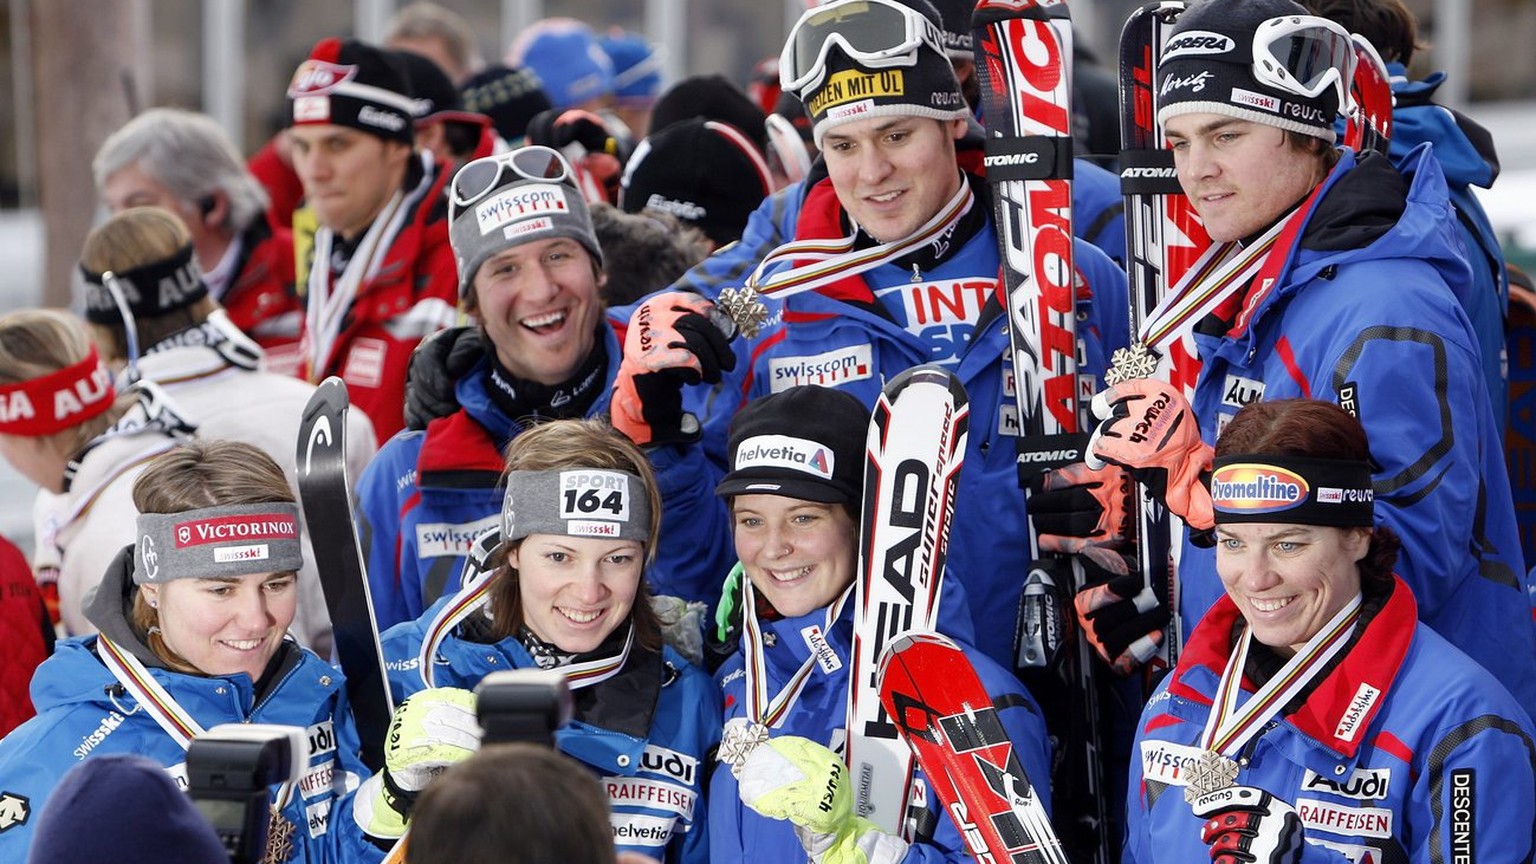 The Swiss team celebrates after clinching the bronze medal of the Nations Team event, at the World Alpine Ski Championships in Are, Sweden, Sunday, Feb. 18, 2007. The athletes are, on top Daniel Albre ...